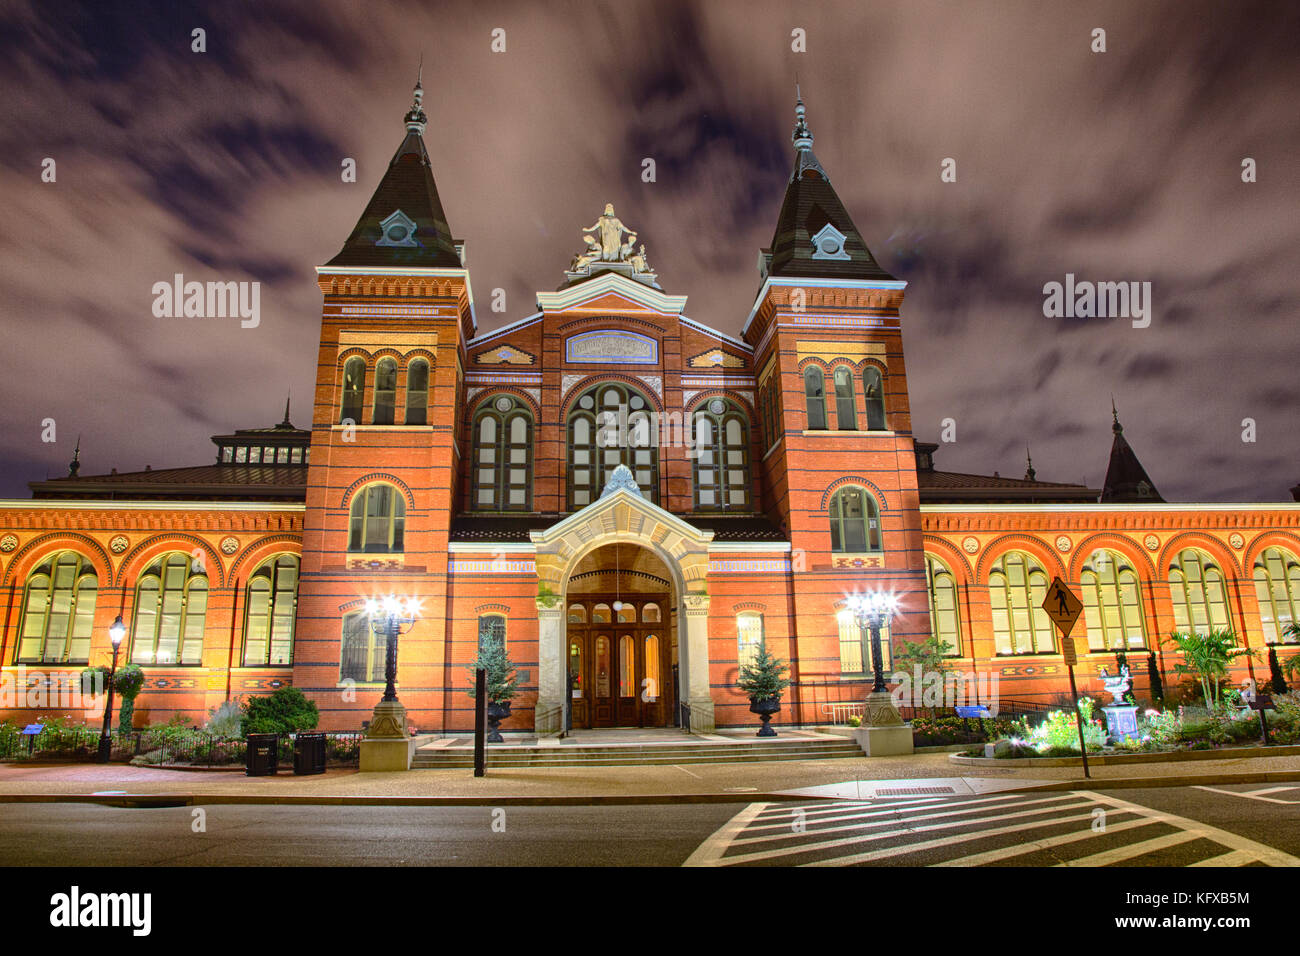 September 12, 2017 Washington, DC, USA: The Smiothsonian National Museum in Washington DC is lit up at night. Stock Photo